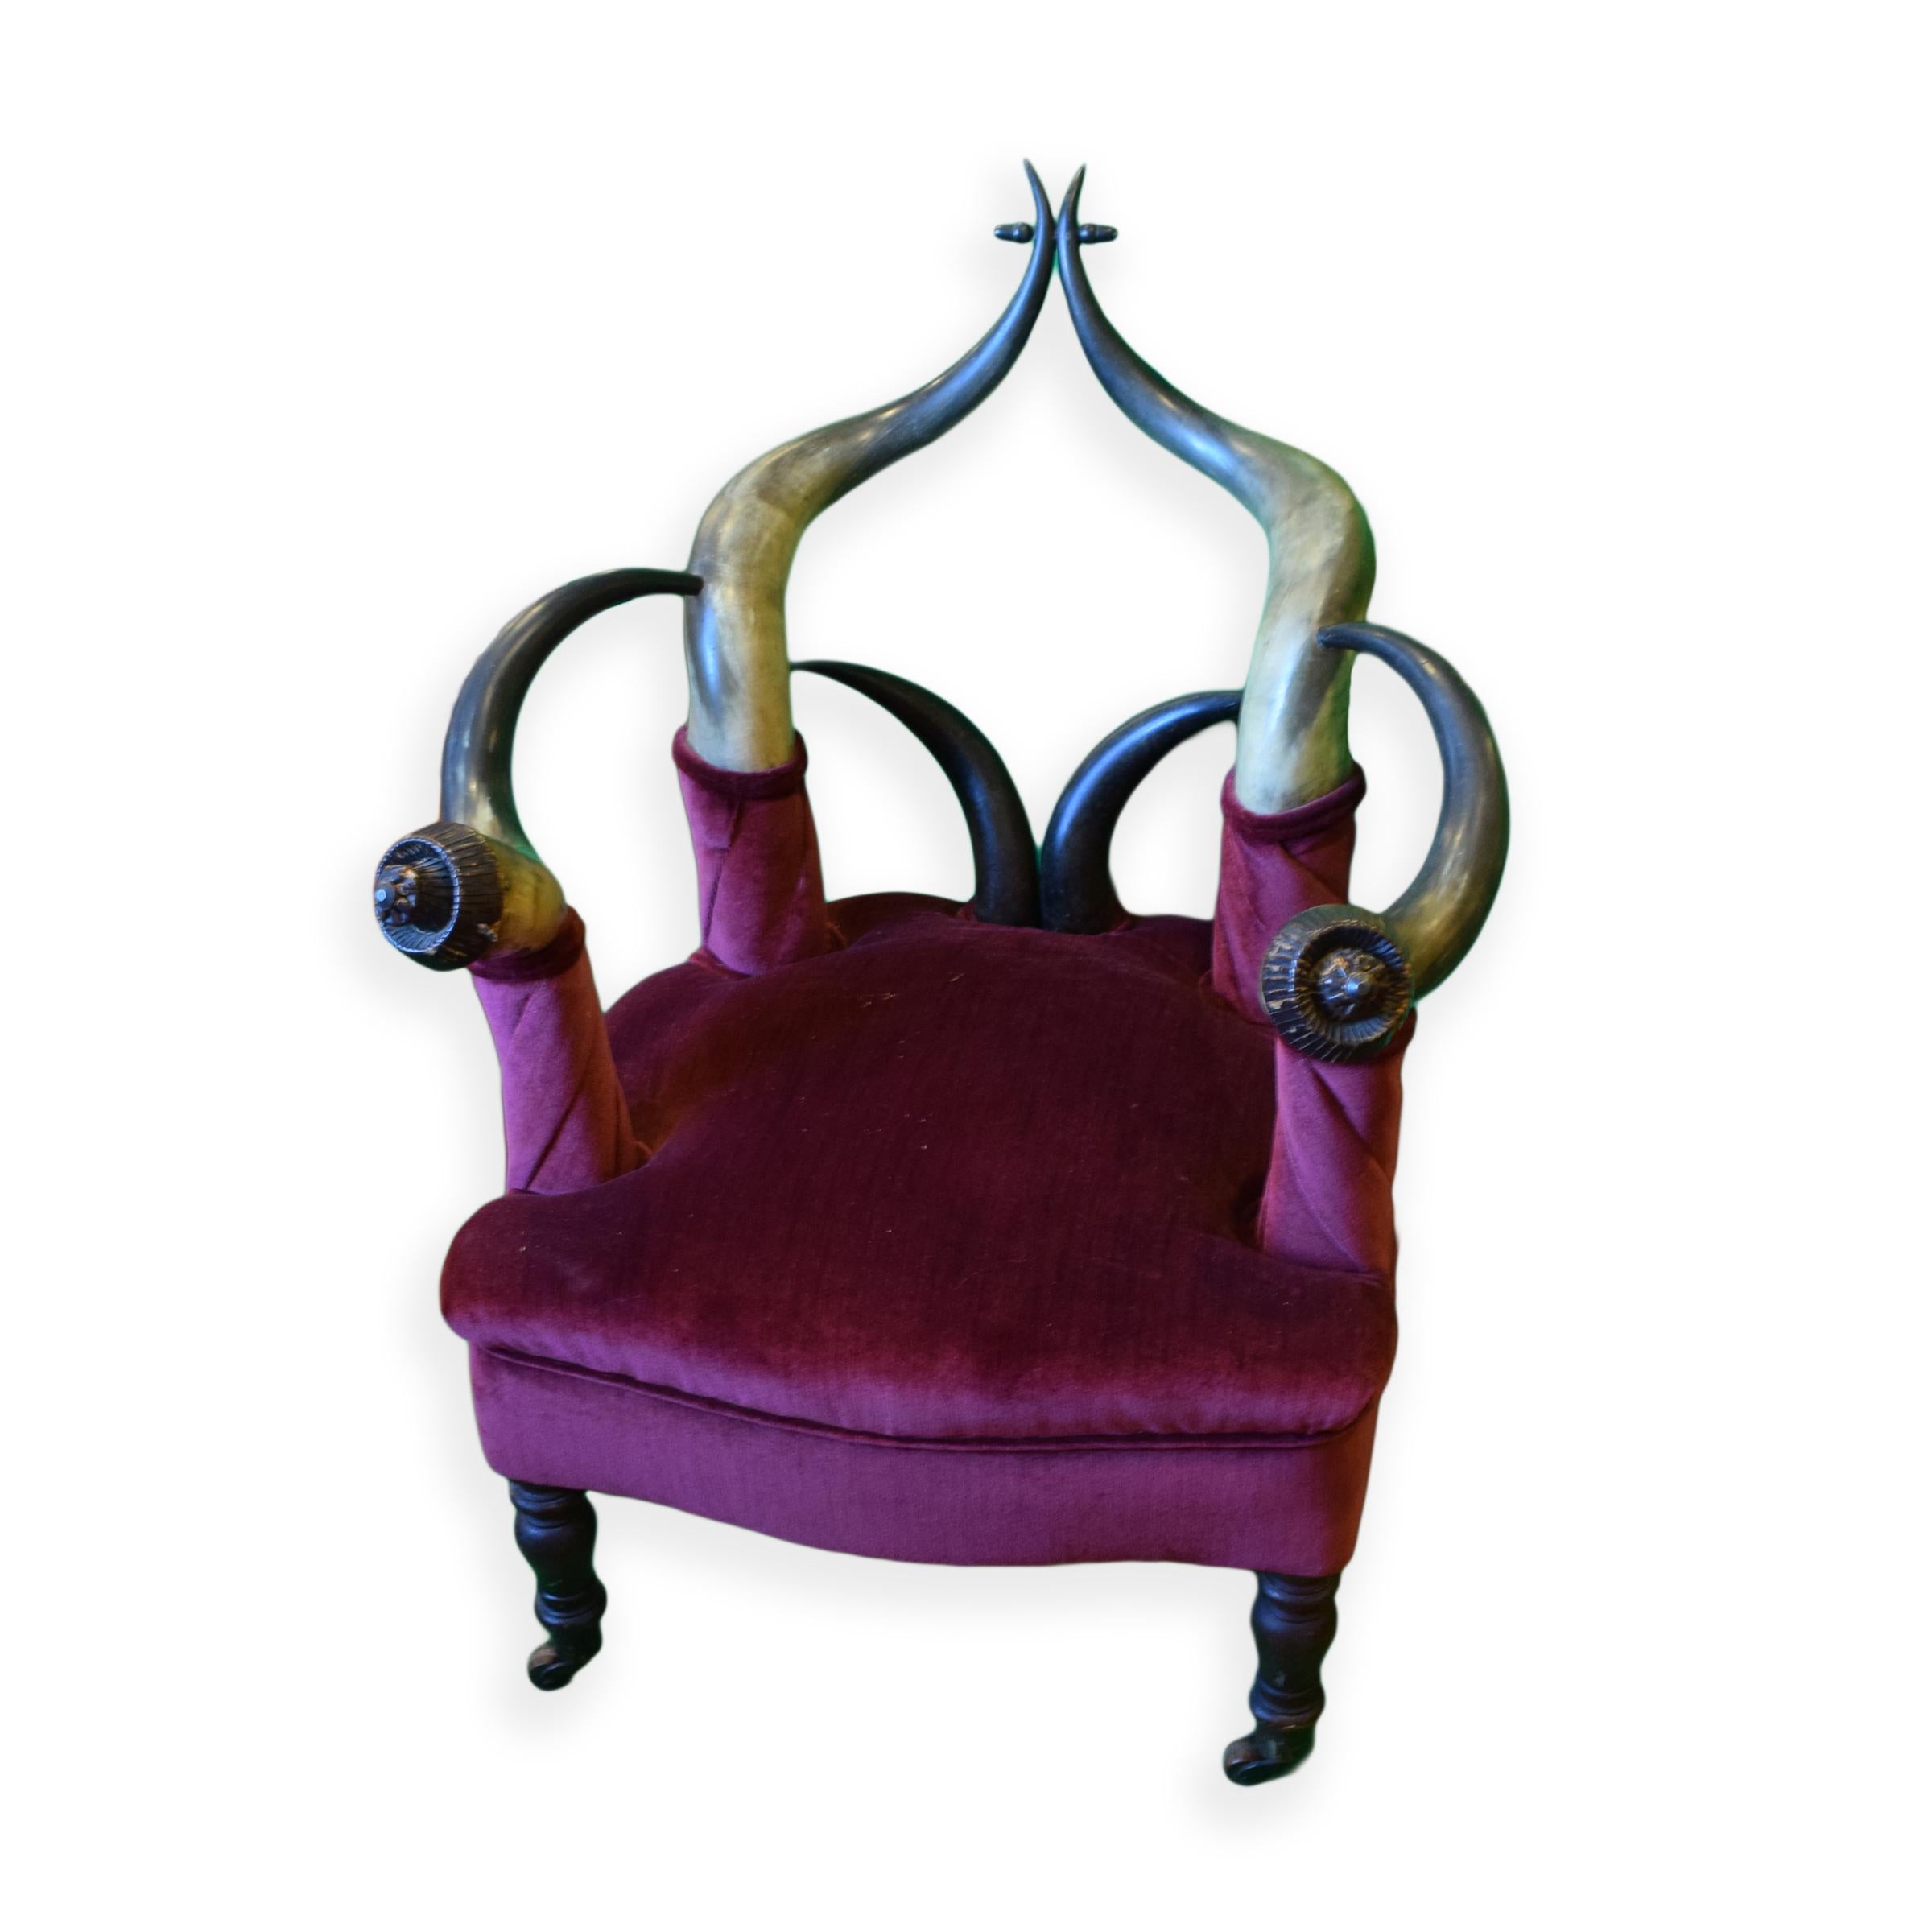 This horn chair came from Texas and was made for the Glantz Ranch between 1880 and 1900. The piece was inherited by Ruth Glantz around 1920 and purchased from her daughter by Fred and Mary Palmer, where it came to their ranch home outside Denver,